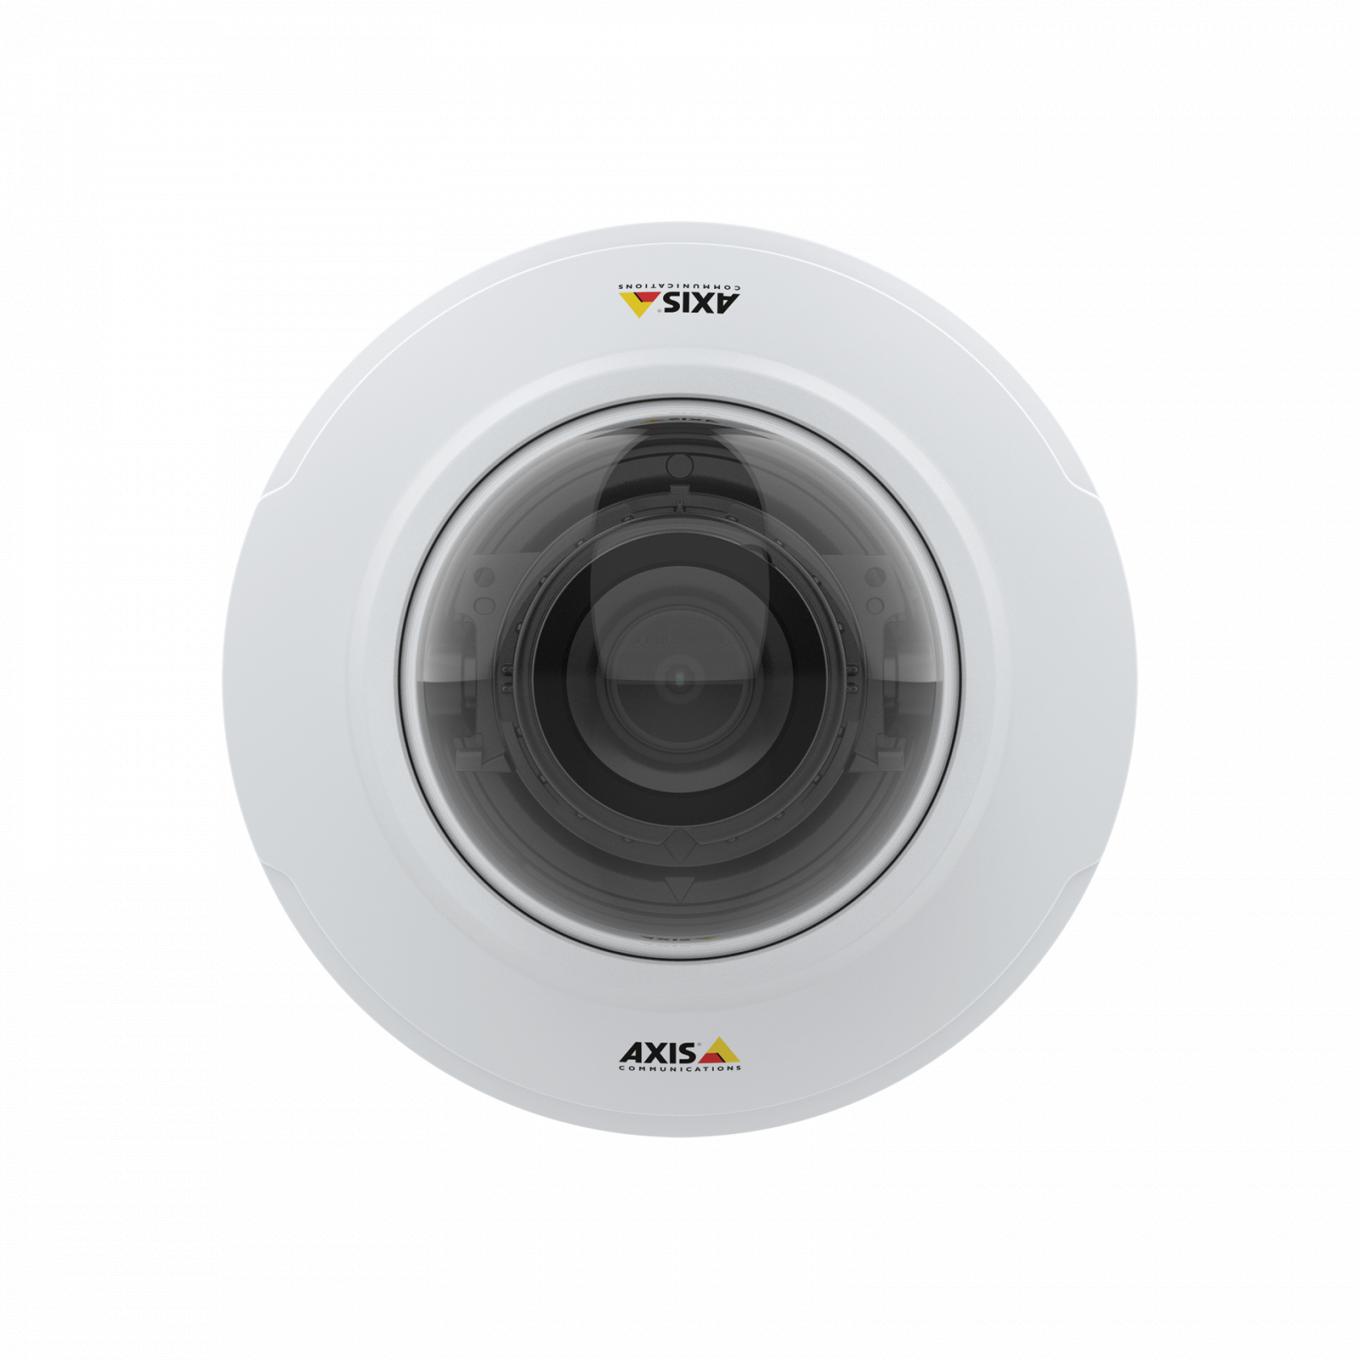 AXIS M4216-V Dome Camera mounted on wall from front